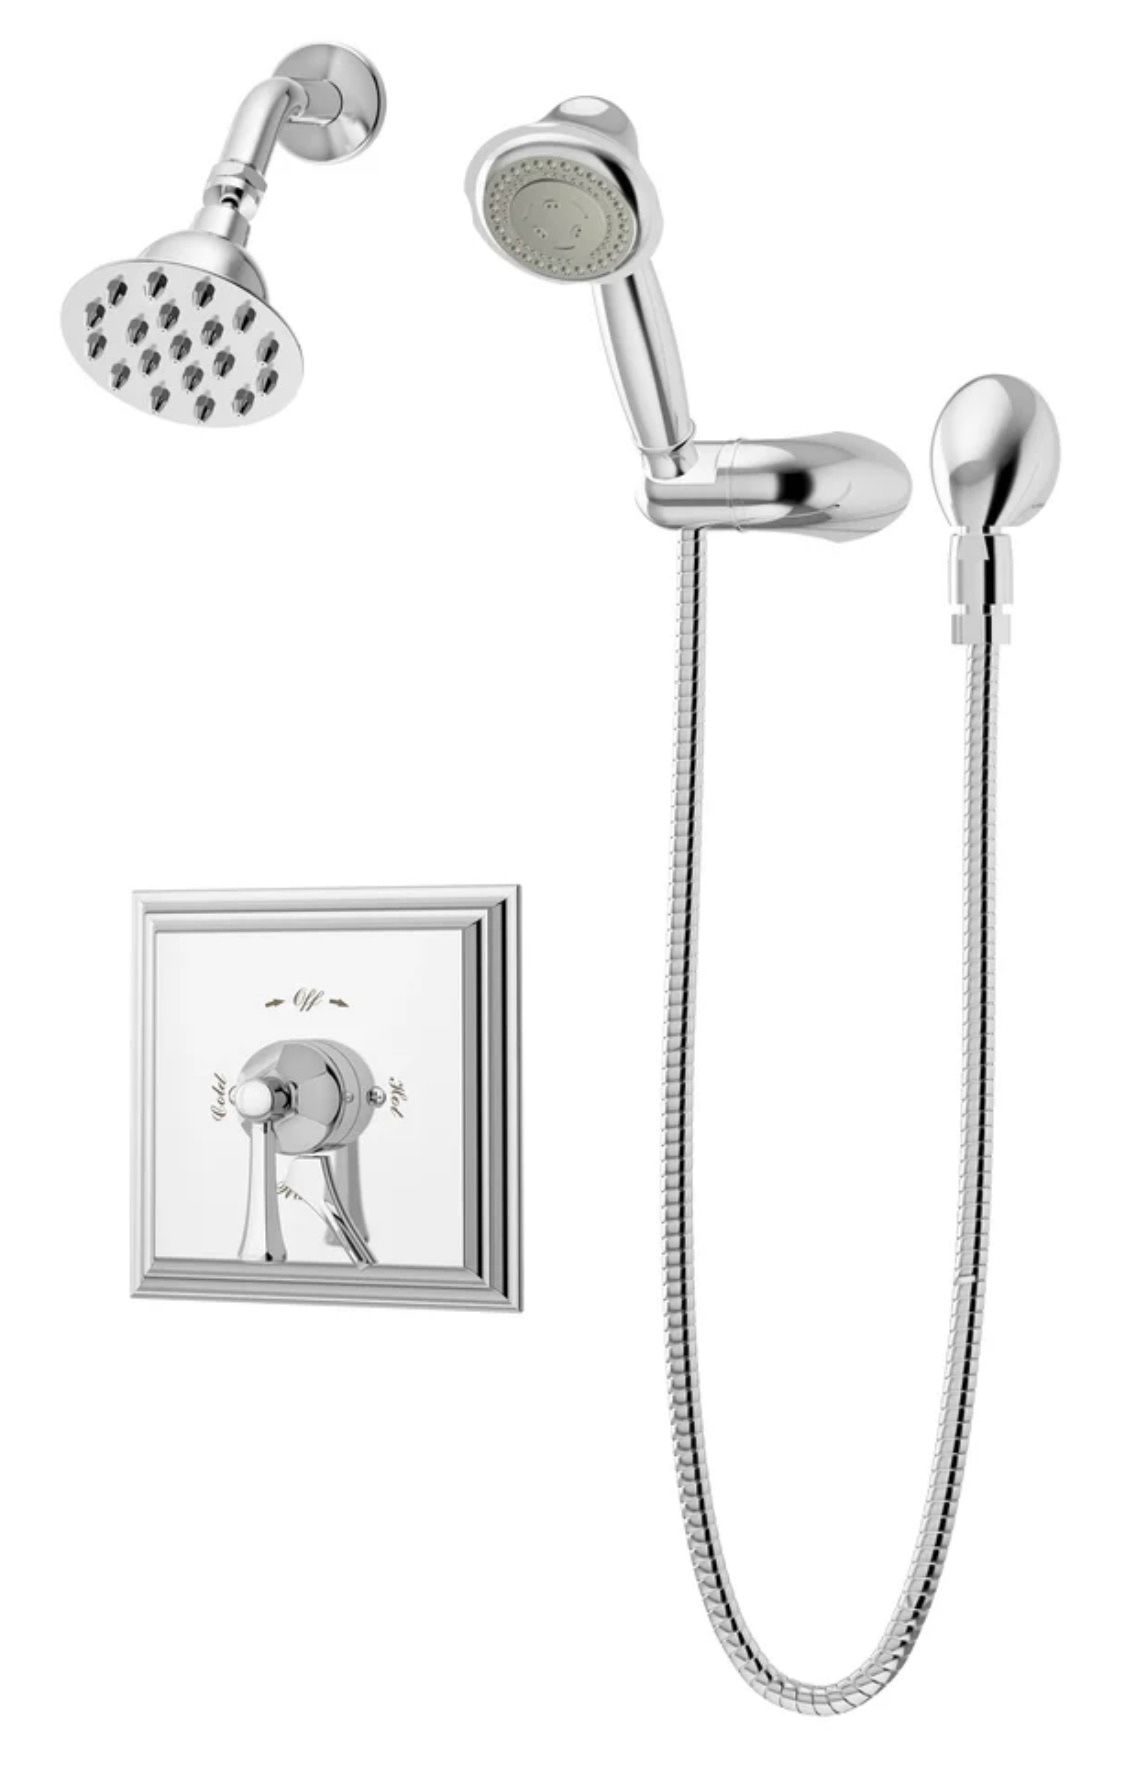 {ONE} Canterbury thermostatic shower faucet by Symmons. Finish: polished chrome. Overall: 3.88” H x 3.88” W x 8.625”. Valve: 7.5” x 7.5”. Swivel spout